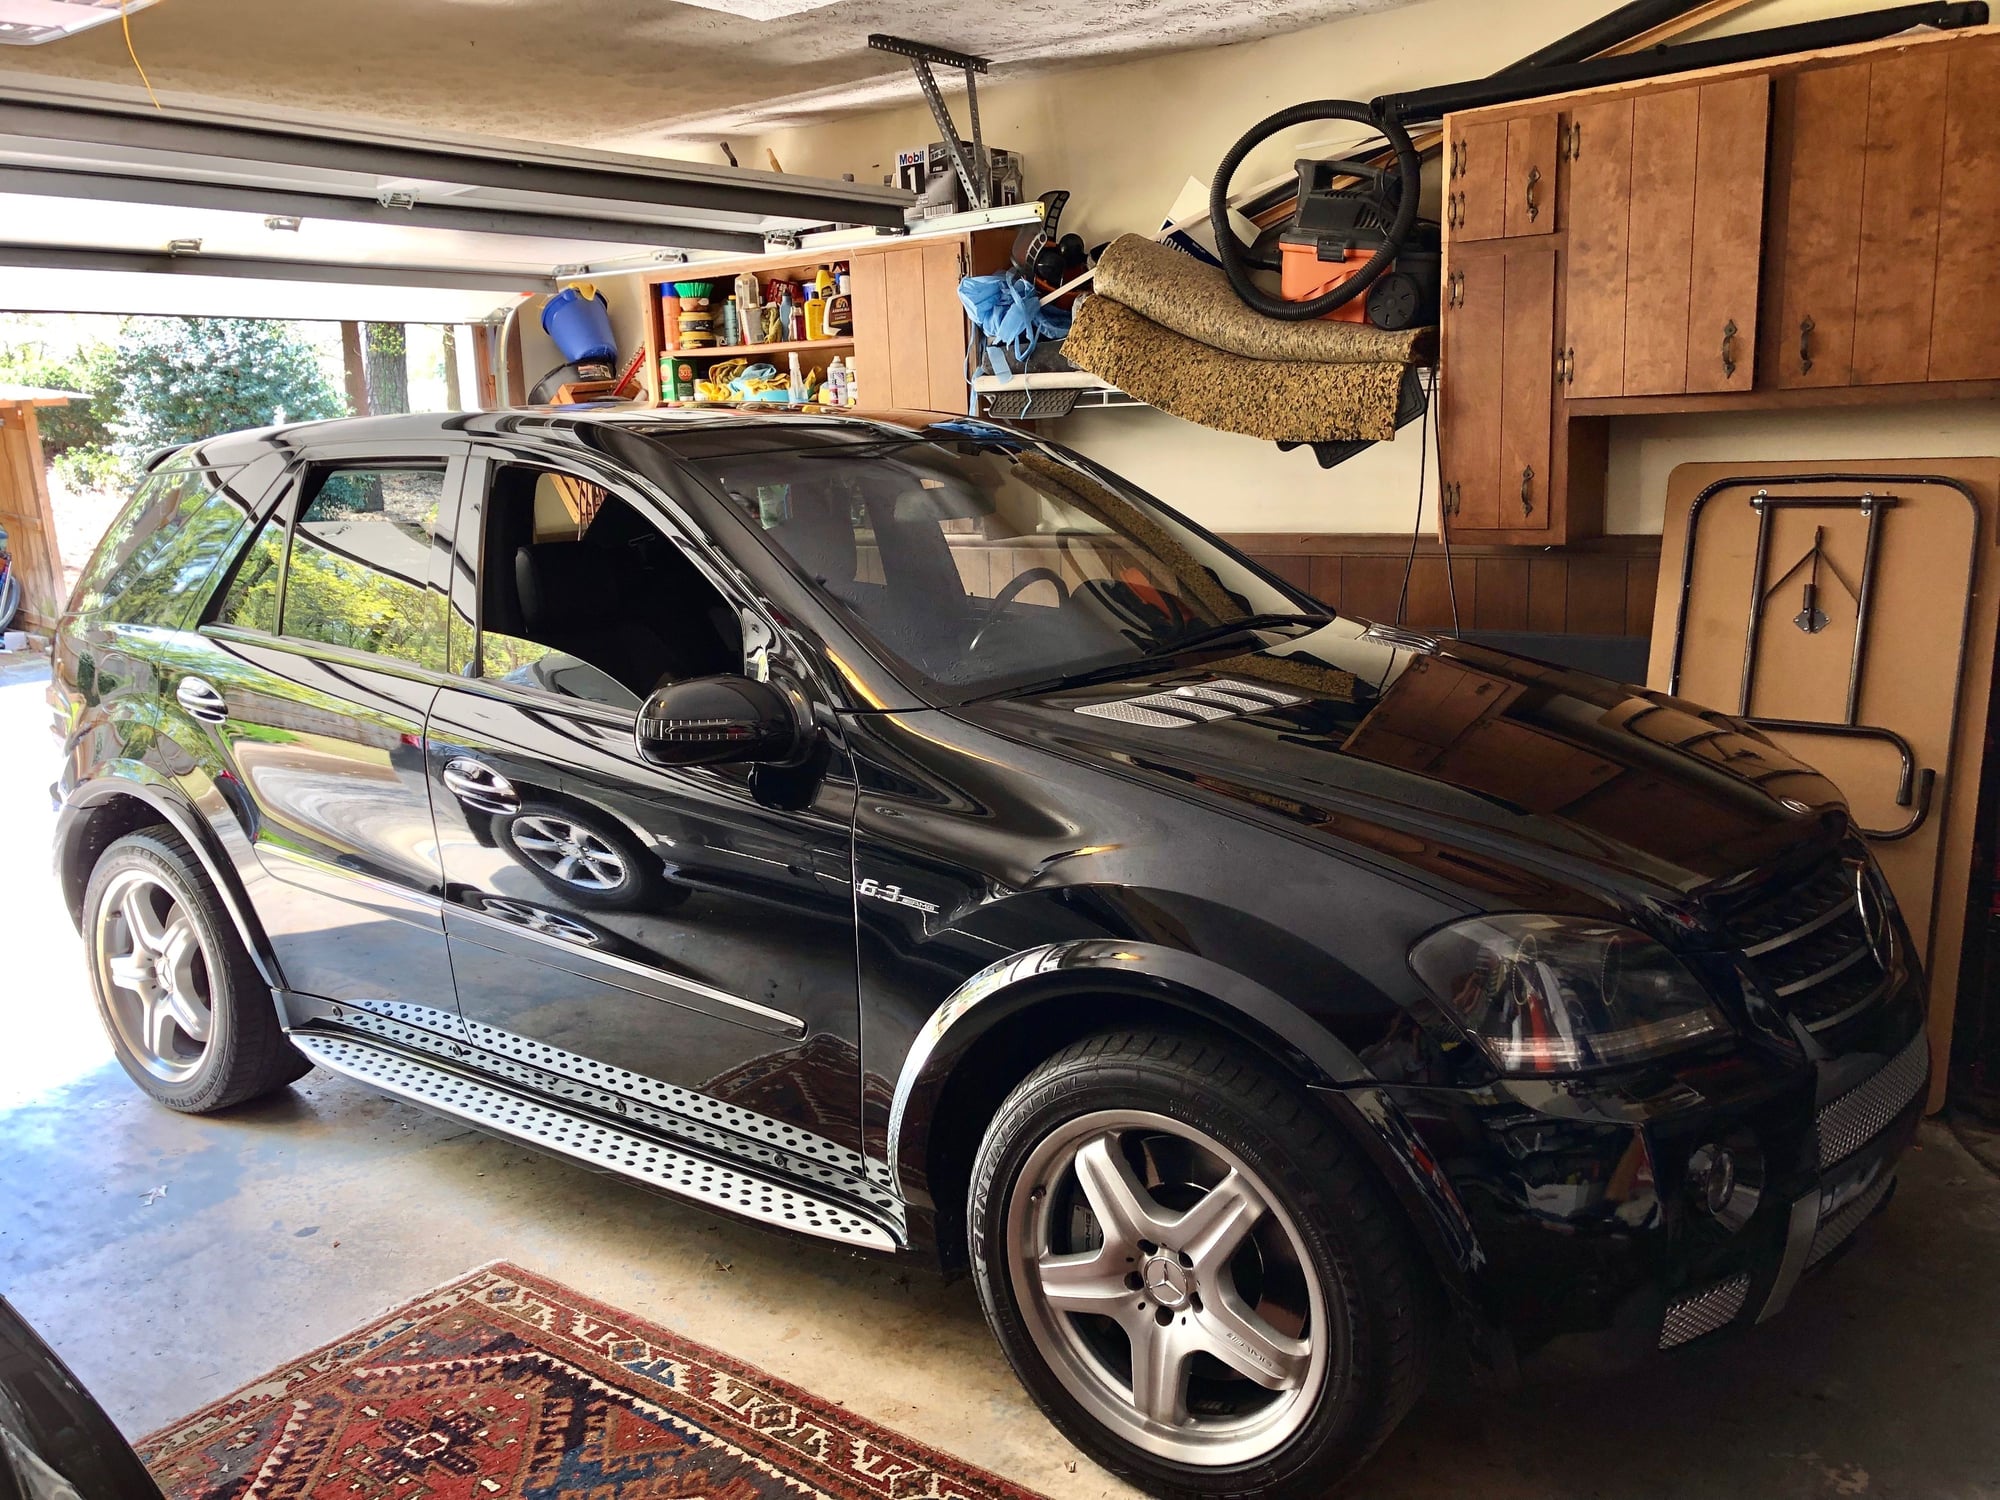 2008 Mercedes-Benz ML63 AMG - ML63 AMG (rare), Only one with miles and reduced price - Used - VIN 4JGBB77E88A359532 - 82,000 Miles - 8 cyl - AWD - Automatic - Wagon - Black - Marietta, GA 30068, United States